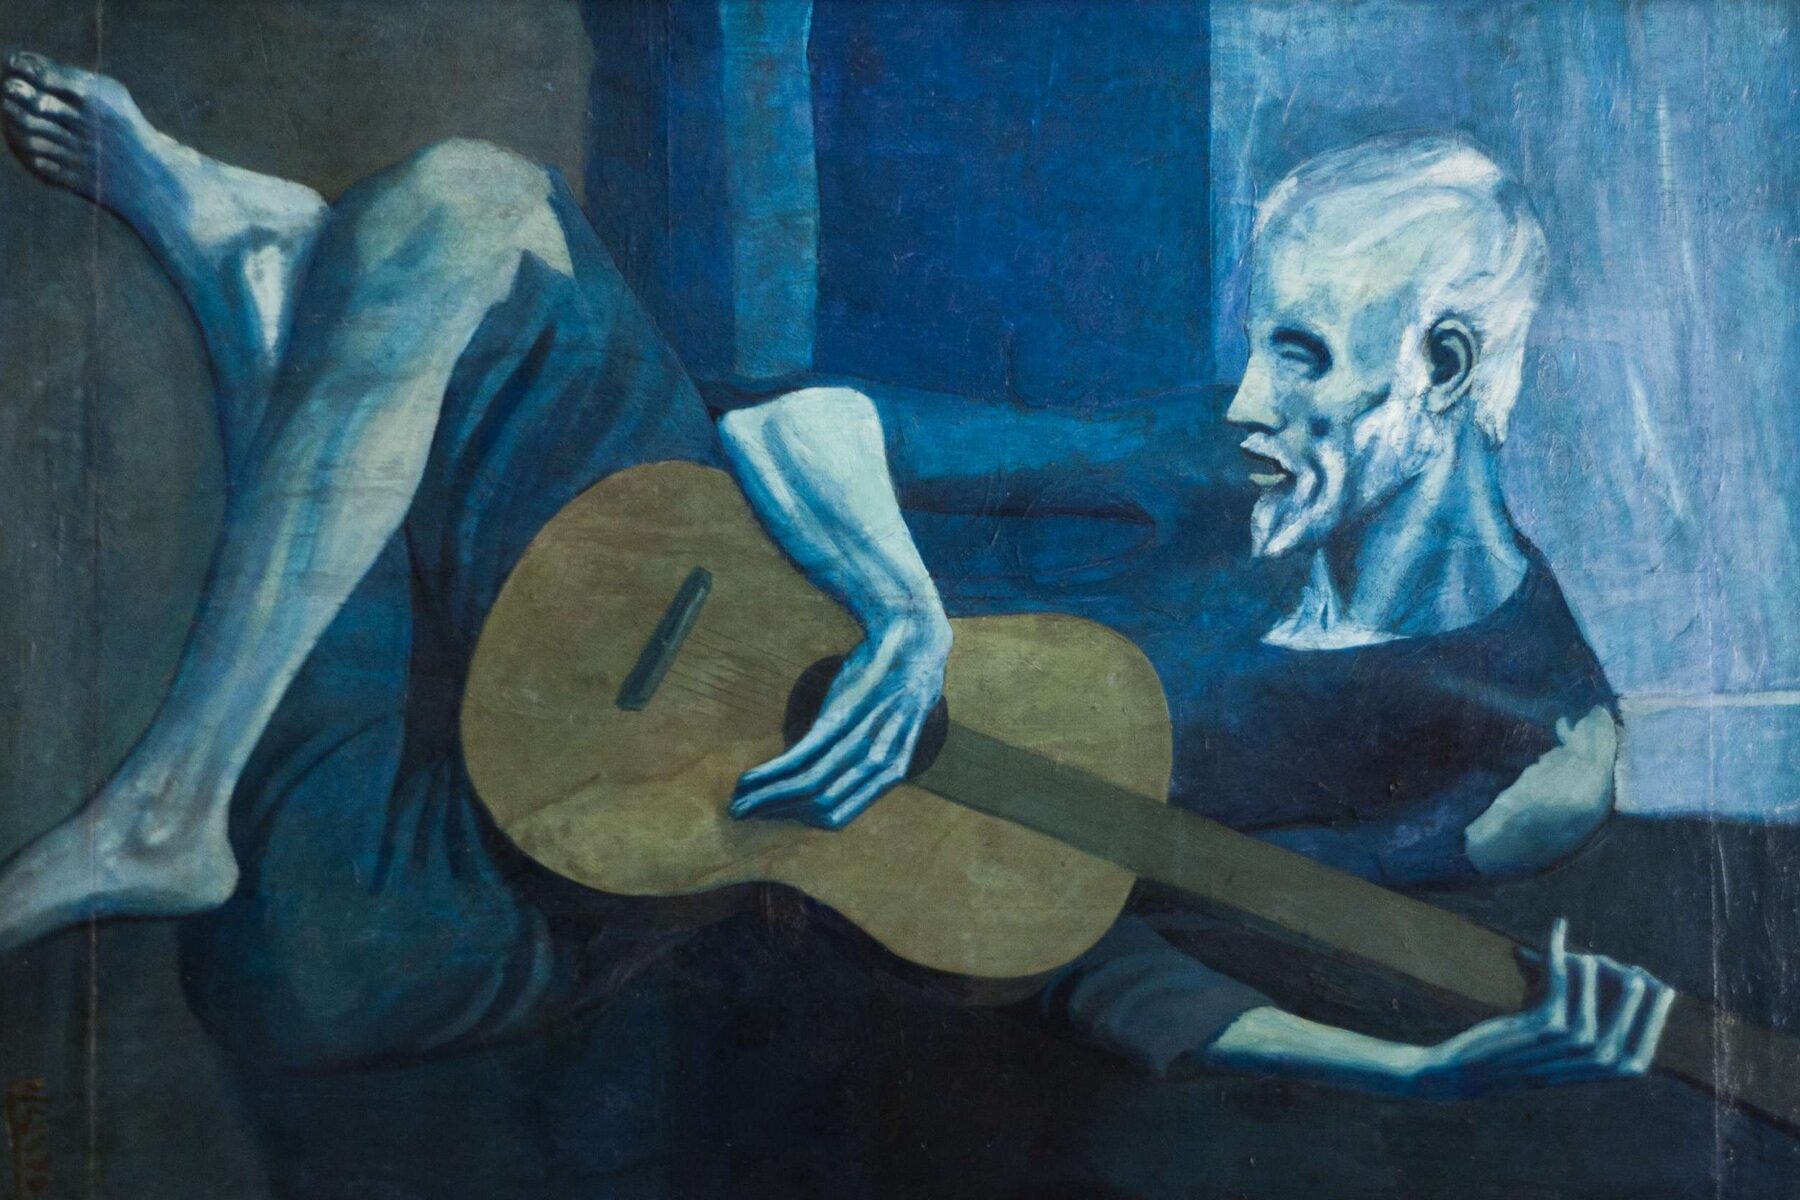 The Old Guitarist by Picasso